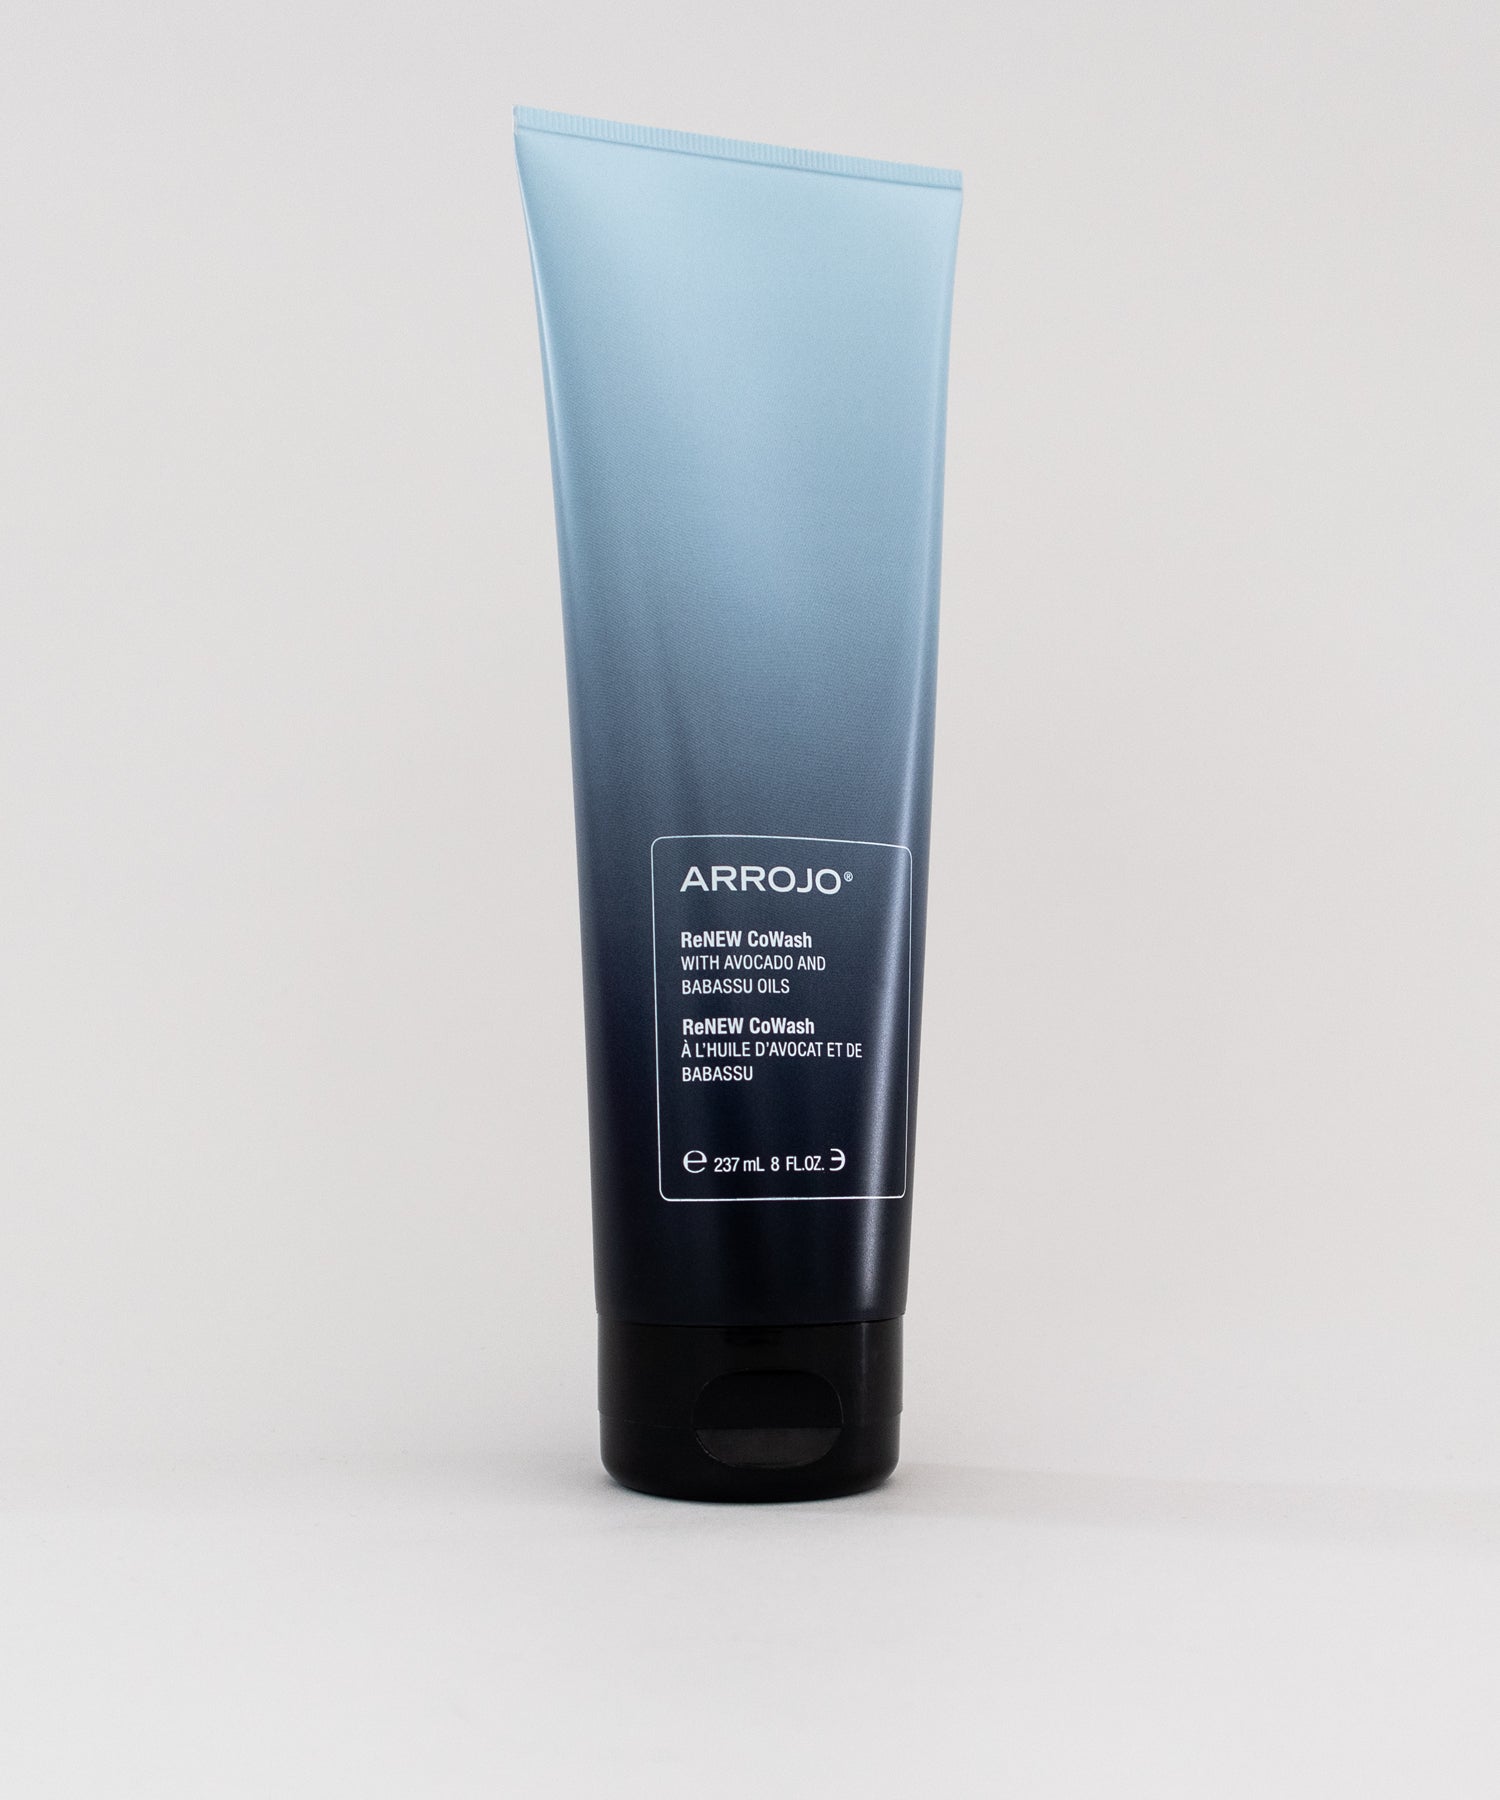 Arrojo ReNEW CoWash is a purifying, non-foaming cleansing conditioner 